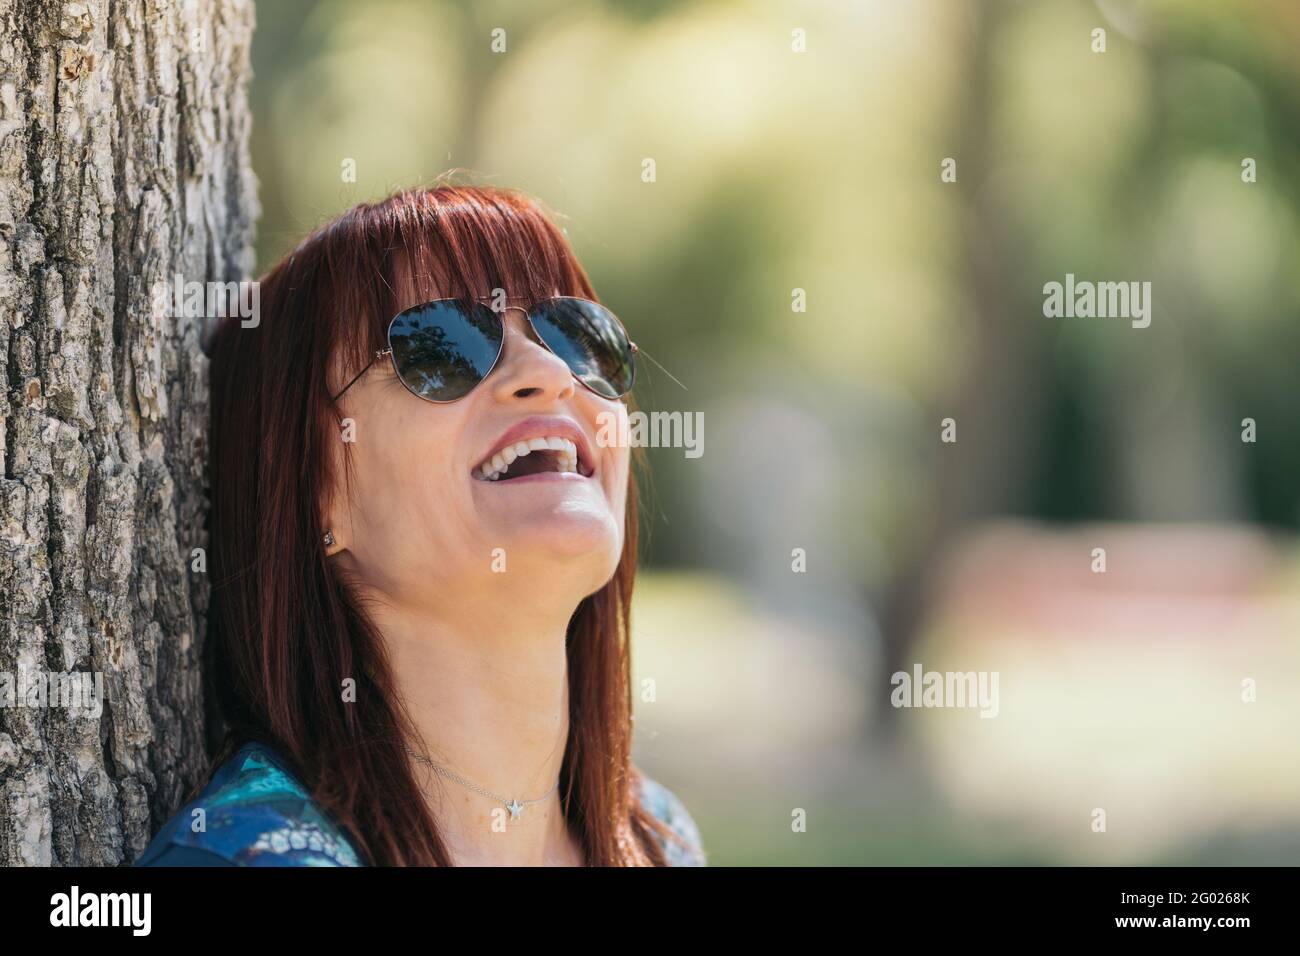 Red-haired woman with sunglasses laughing leaning against a tree on a sunny day. Medium close up. Selective focus. Stock Photo